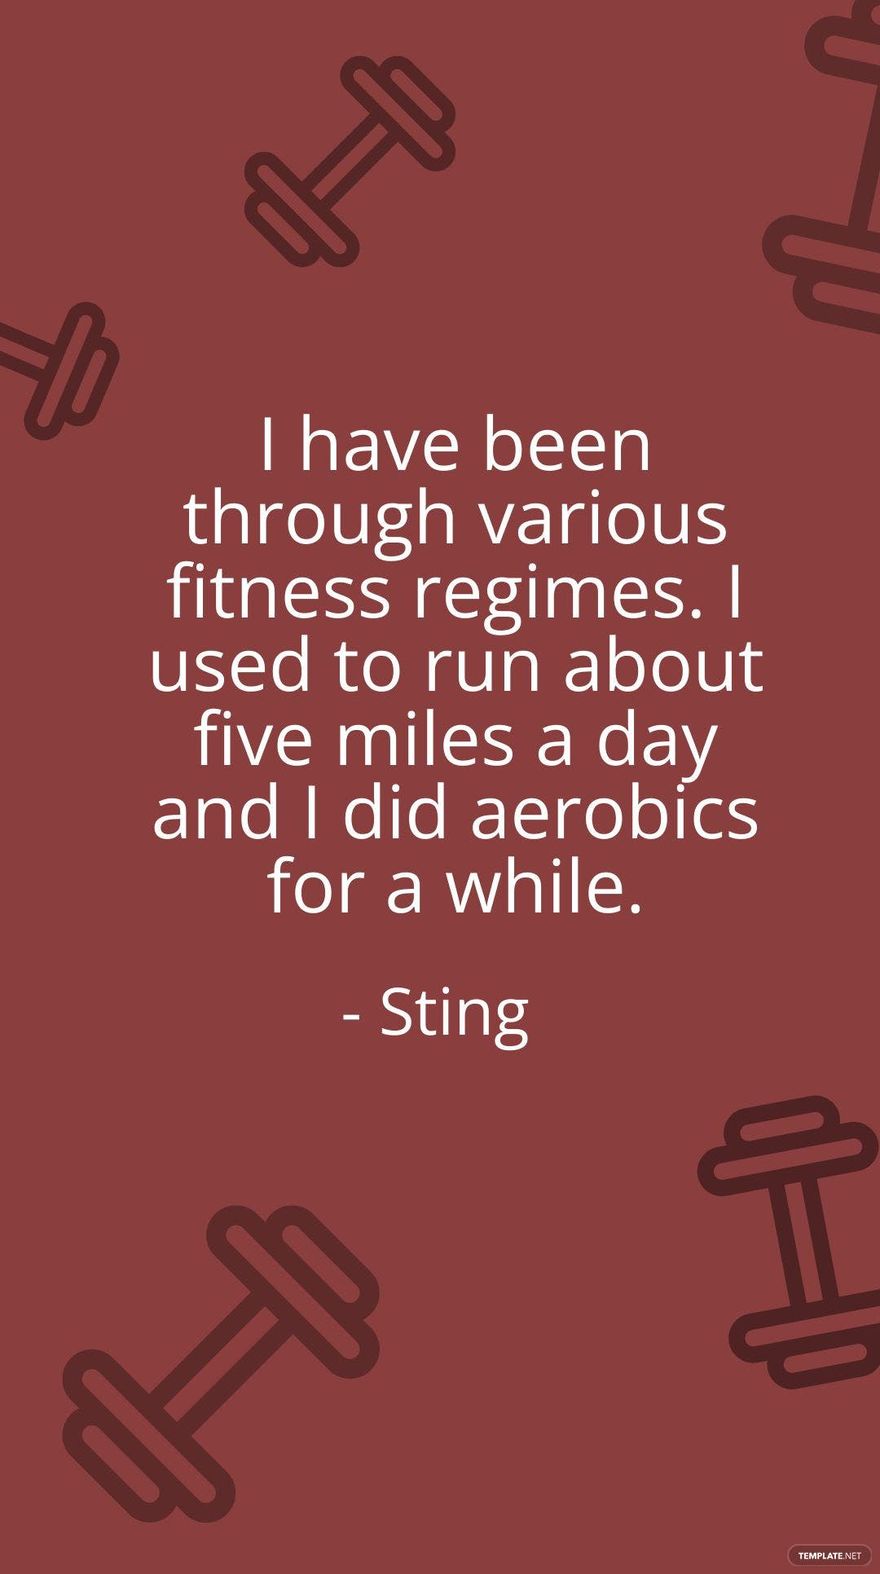 Sting - I have been through various fitness regimes. I used to run about five miles a day and I did aerobics for a while.